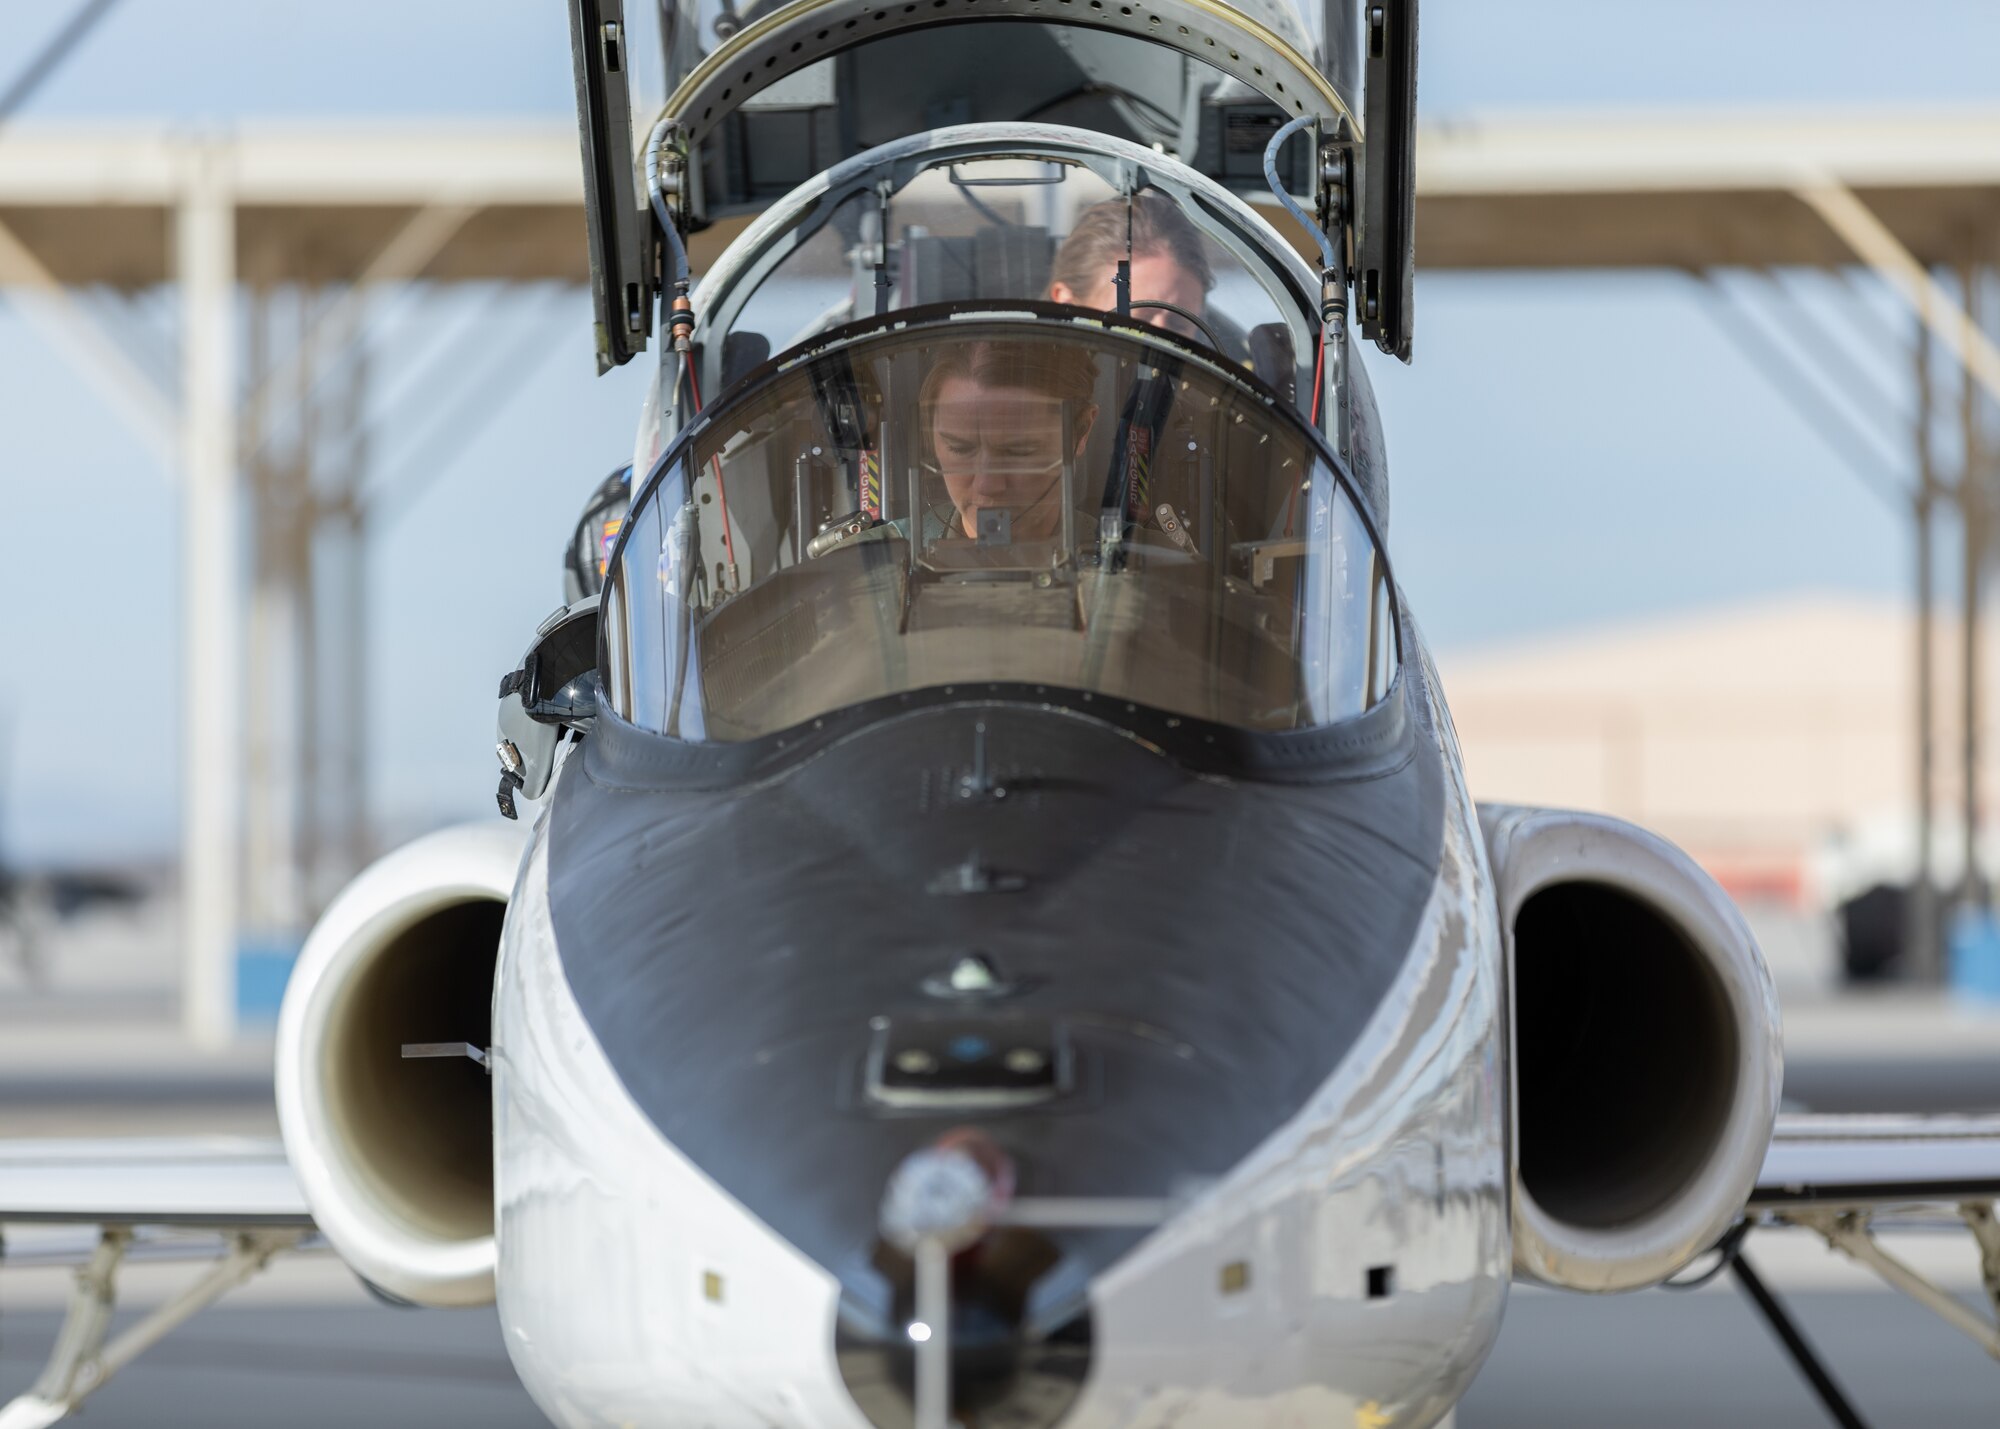 T-38 Talon pilot Caroline White, 412th Operations Group Standards and Evaluations Deputy Chief, and Jess Peterson, 412th Operations Group Technical Director, prepare to conduct a training sortie from Edwards Air Force Base, California, March 3. (Air Force photo by Bryce Bennett)